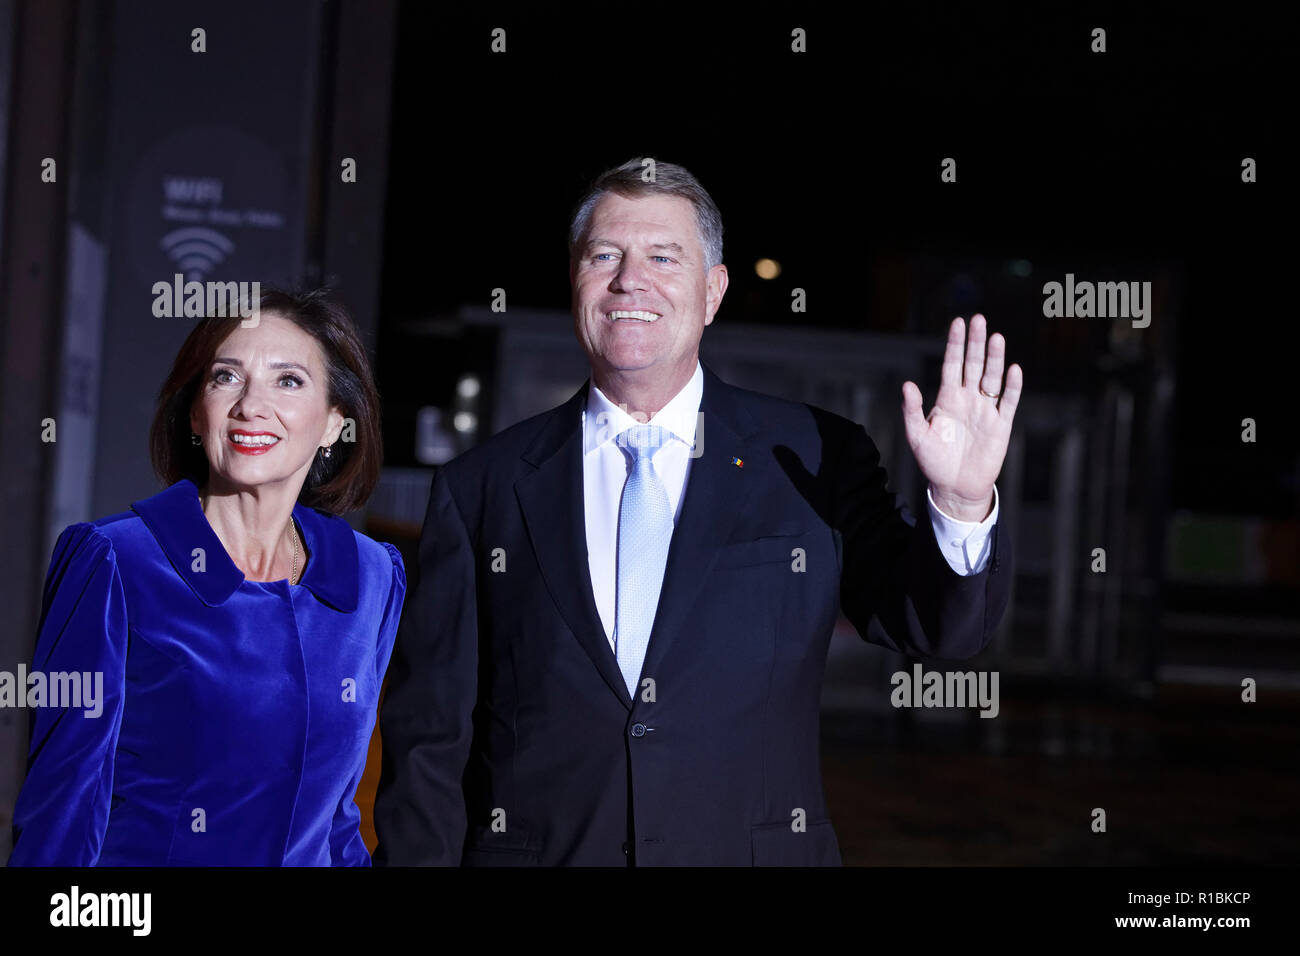 Klaus Iohannis Carmen High Resolution Stock Photography and Images - Alamy